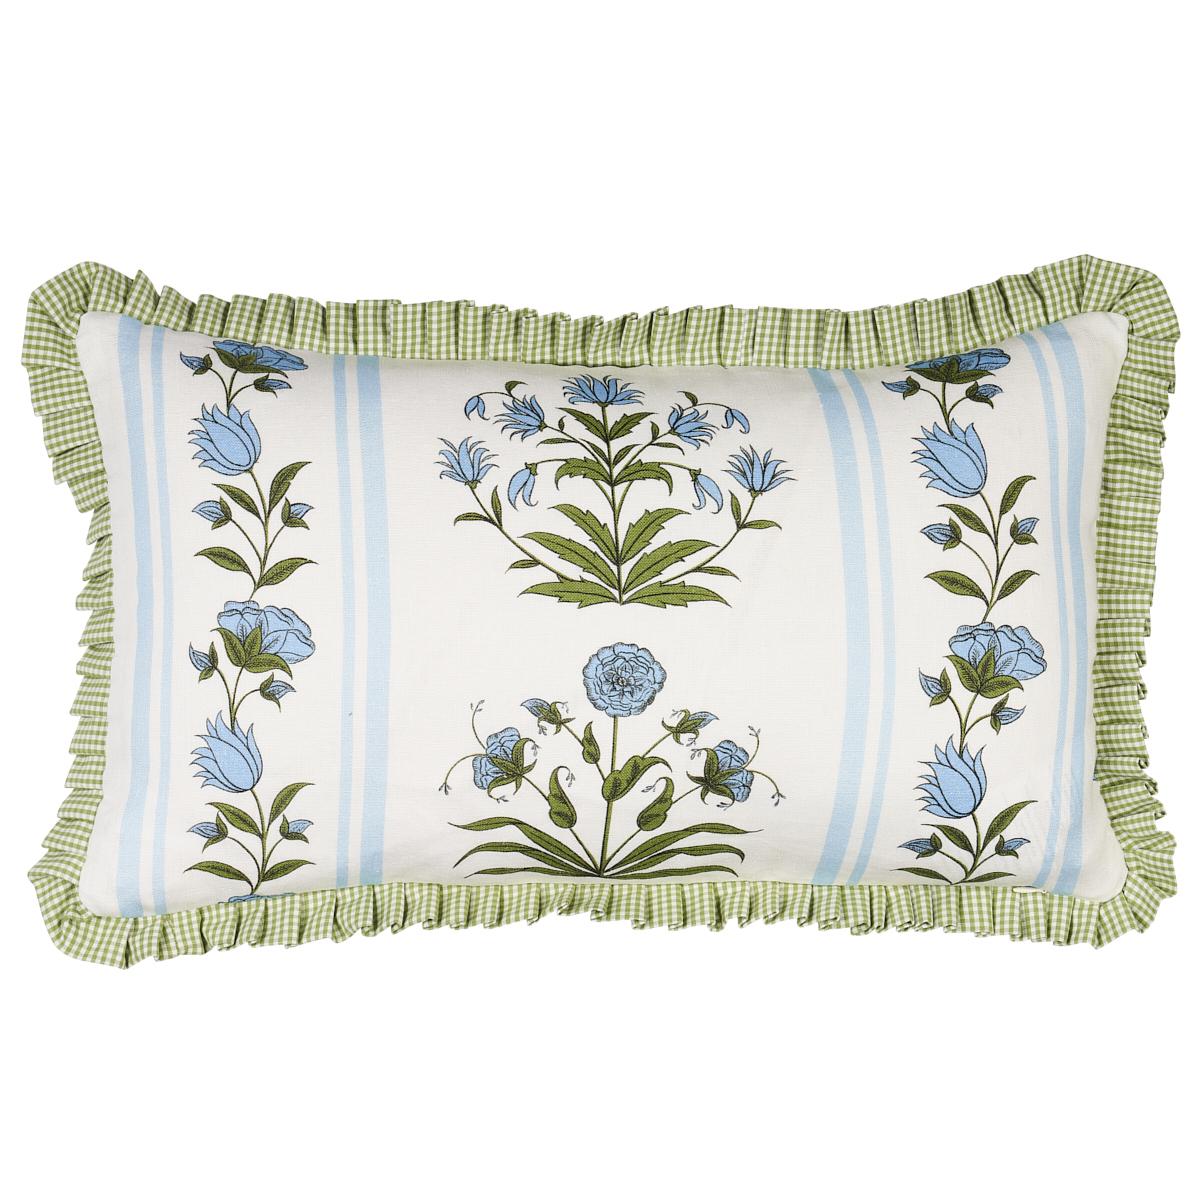 This pillow features Royal Poppy Stripe by Marie-Anna Oudejans for Schumacher. Inspired by Dutch simplicity and traditional Indian flower motifs, Jaipur, India–based decorative painter Marie-Anne Oudejans created Royal Poppy Stripe in sky as a